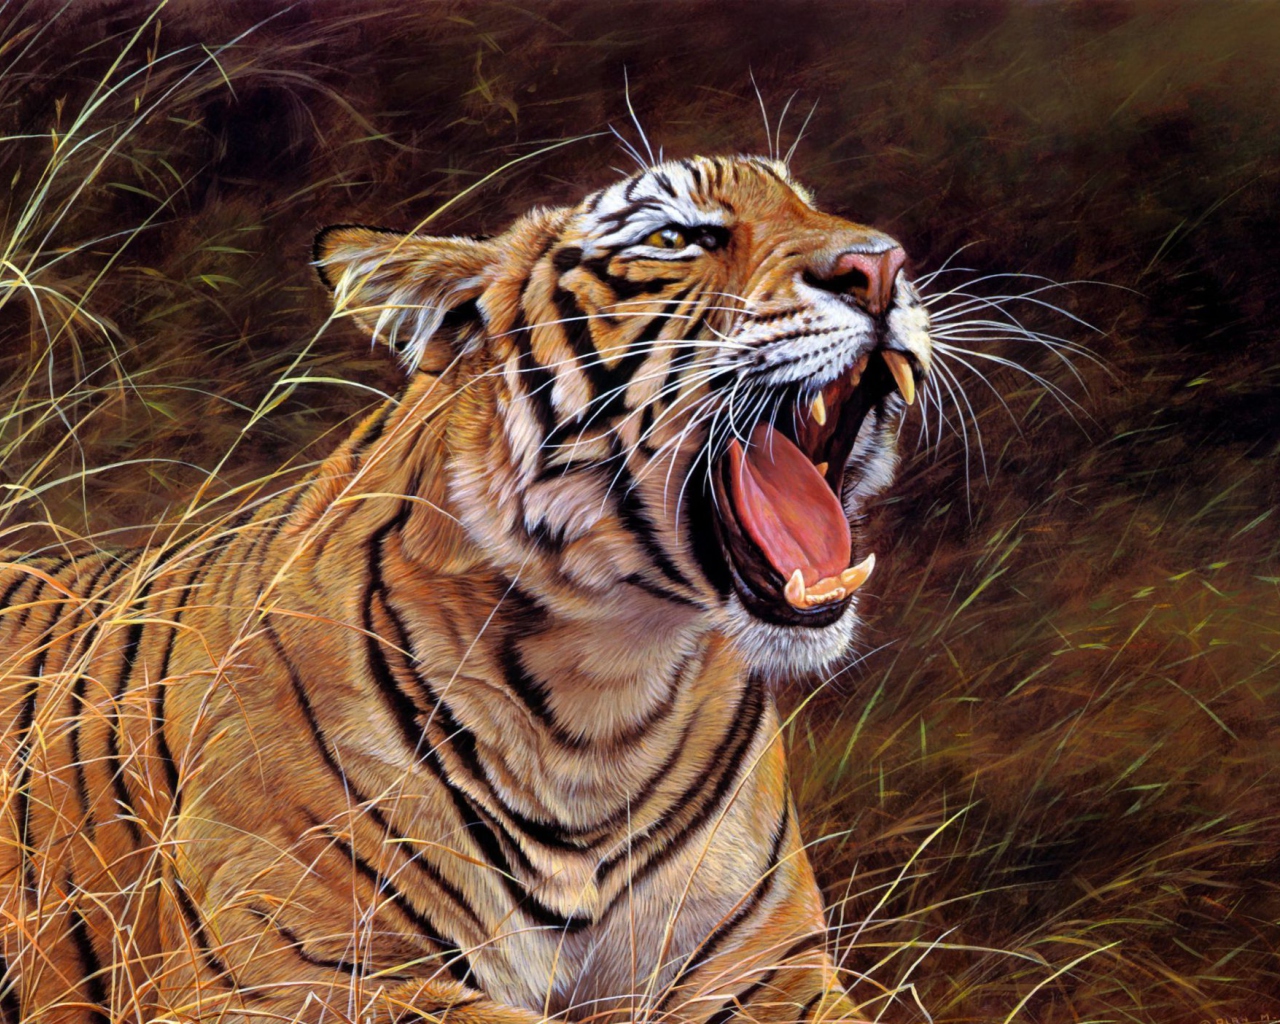 Tiger In The Grass wallpaper 1280x1024